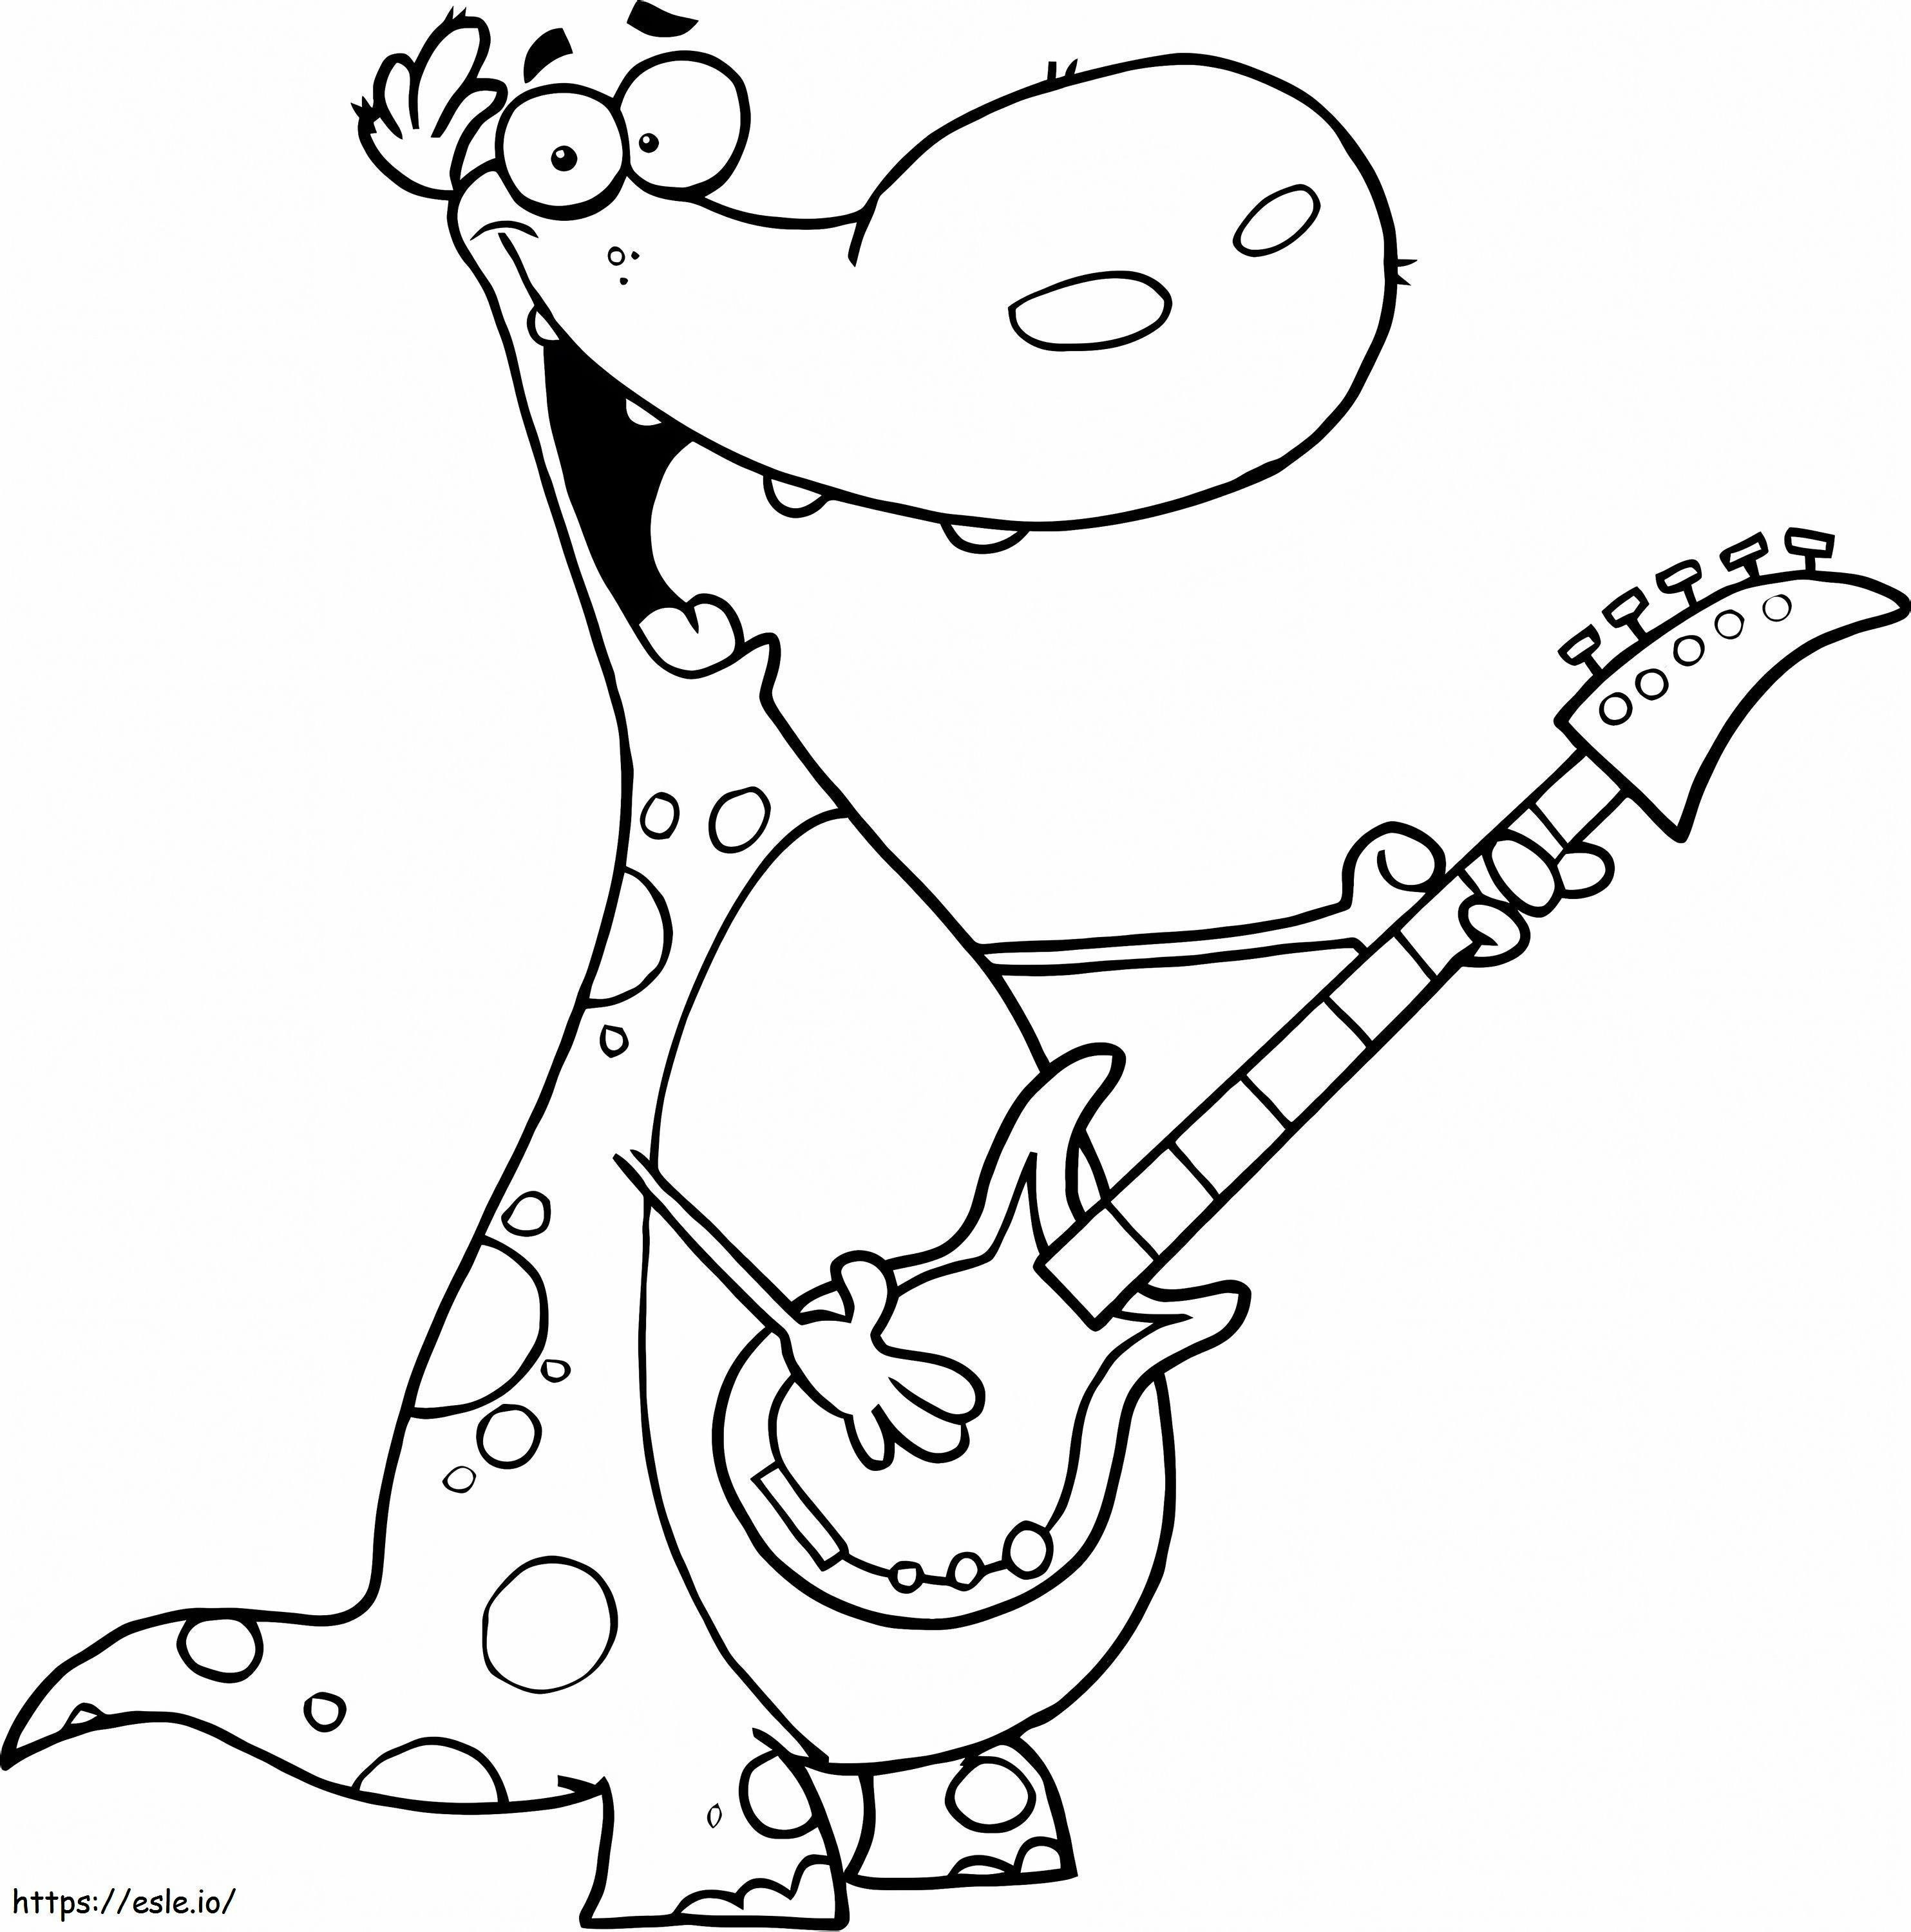 1539912990 High Tech Guitar Player Cozy Inspiration Singing Pages Rocker coloring page